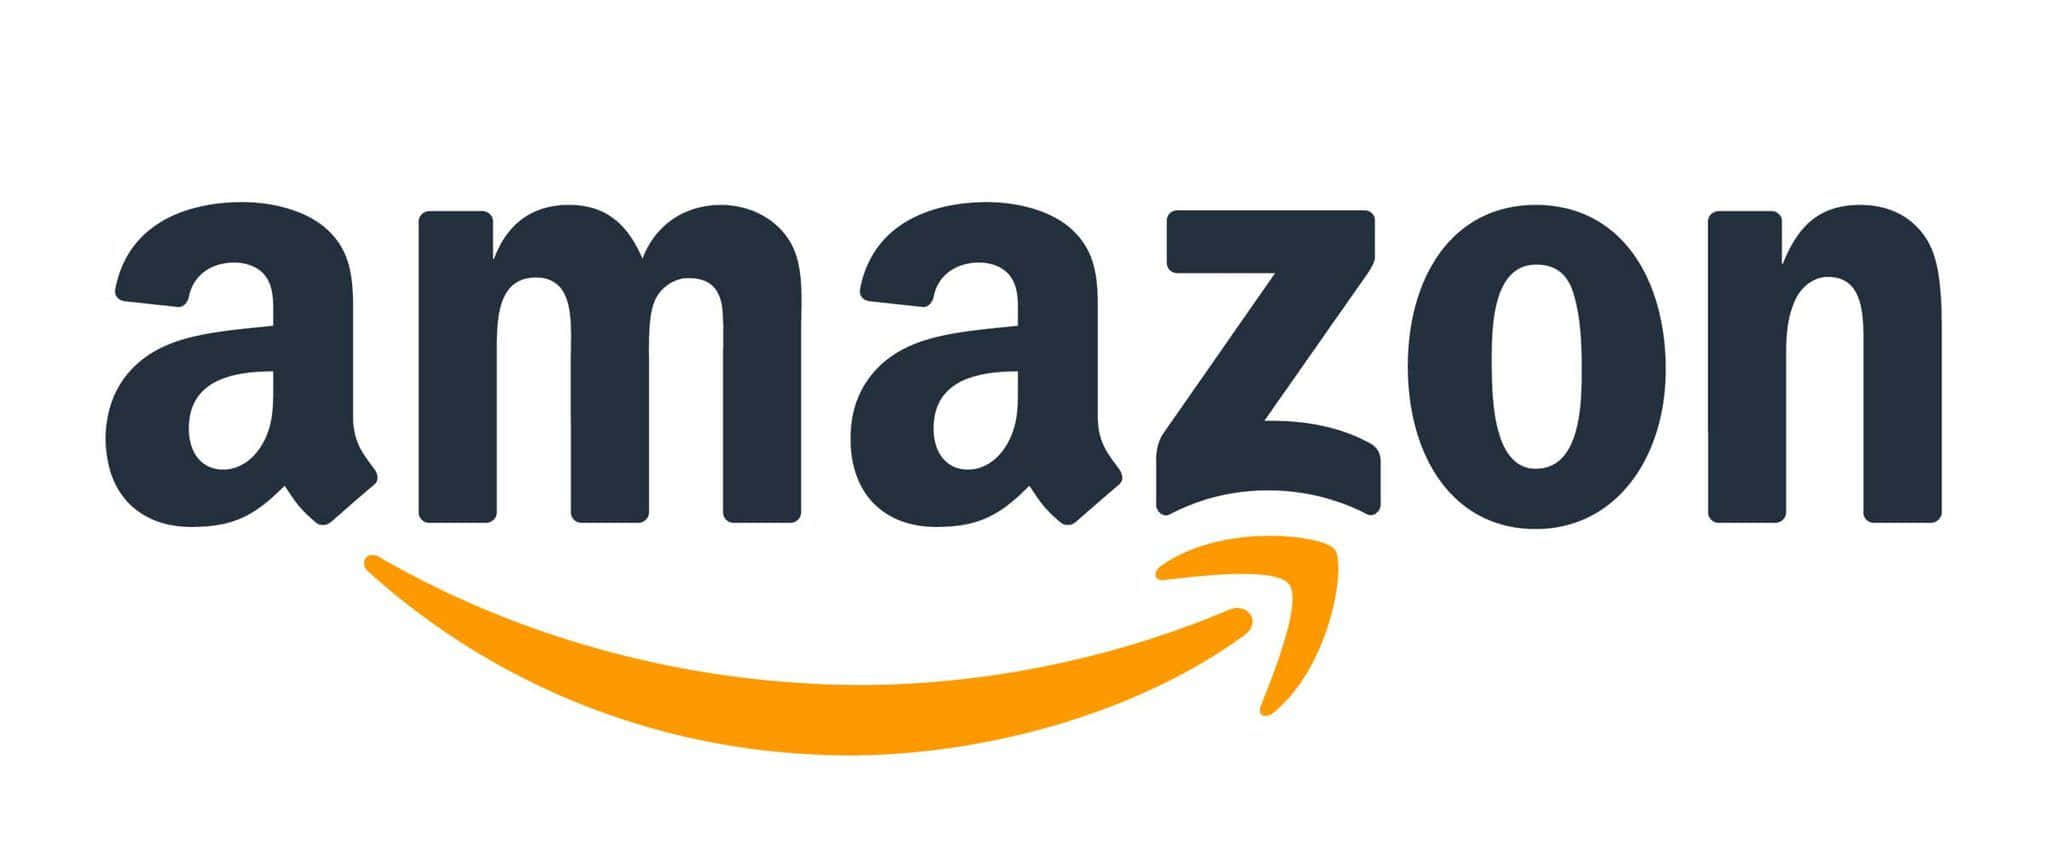 Explore the world of Amazon with endless possibilities!